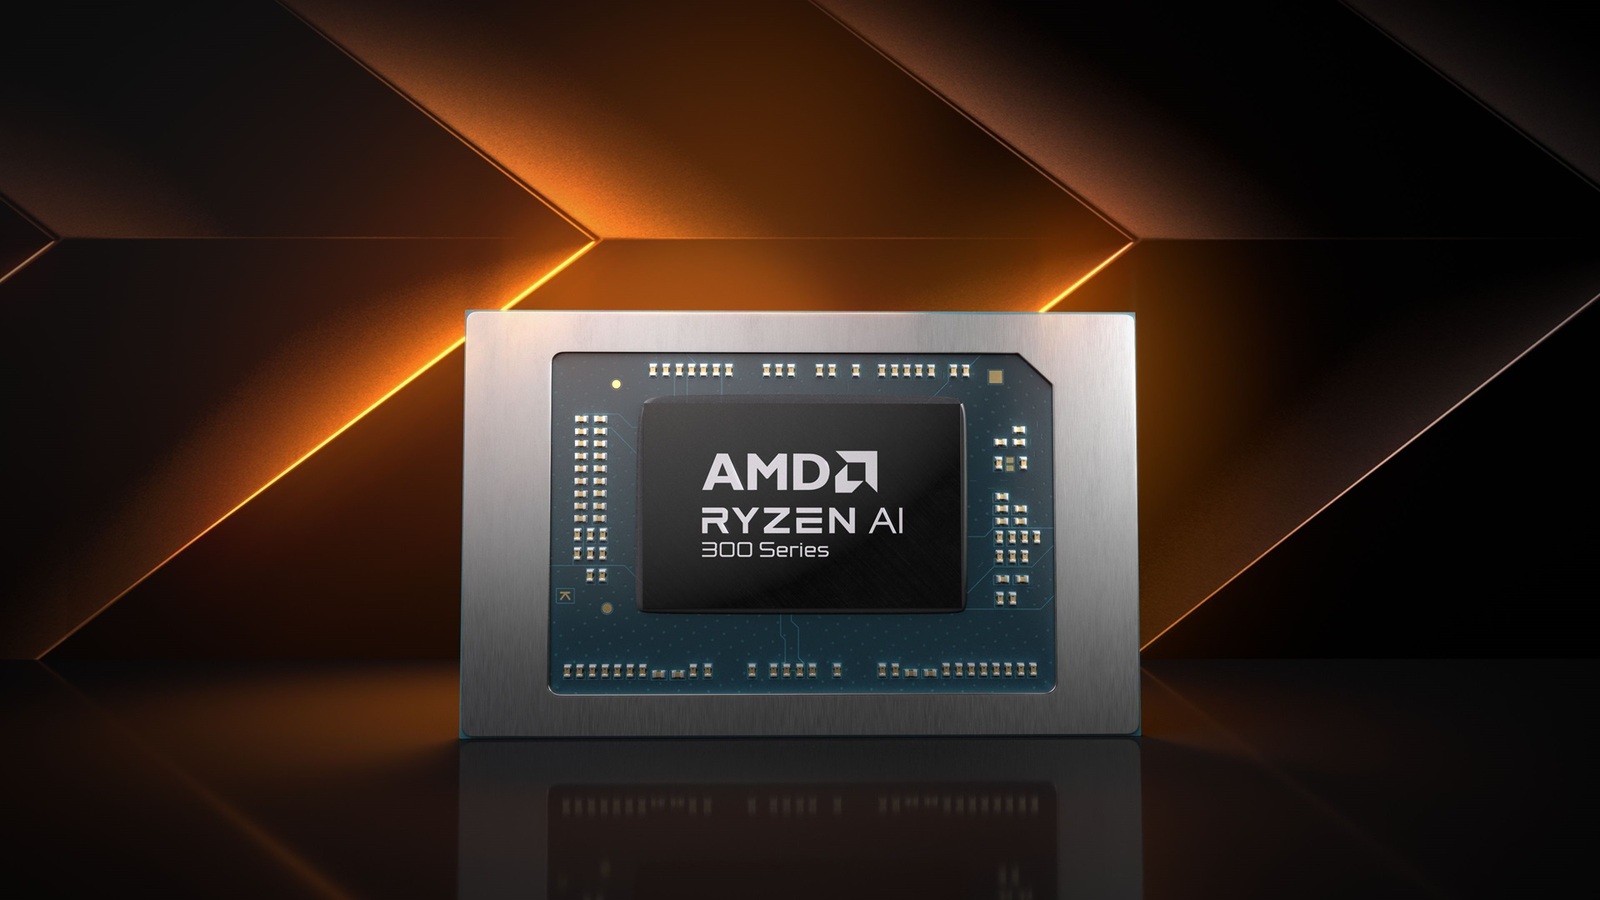 AMD claims that its top-of-the-line Ryzen AI chip is faster than Apple's M3 Pro